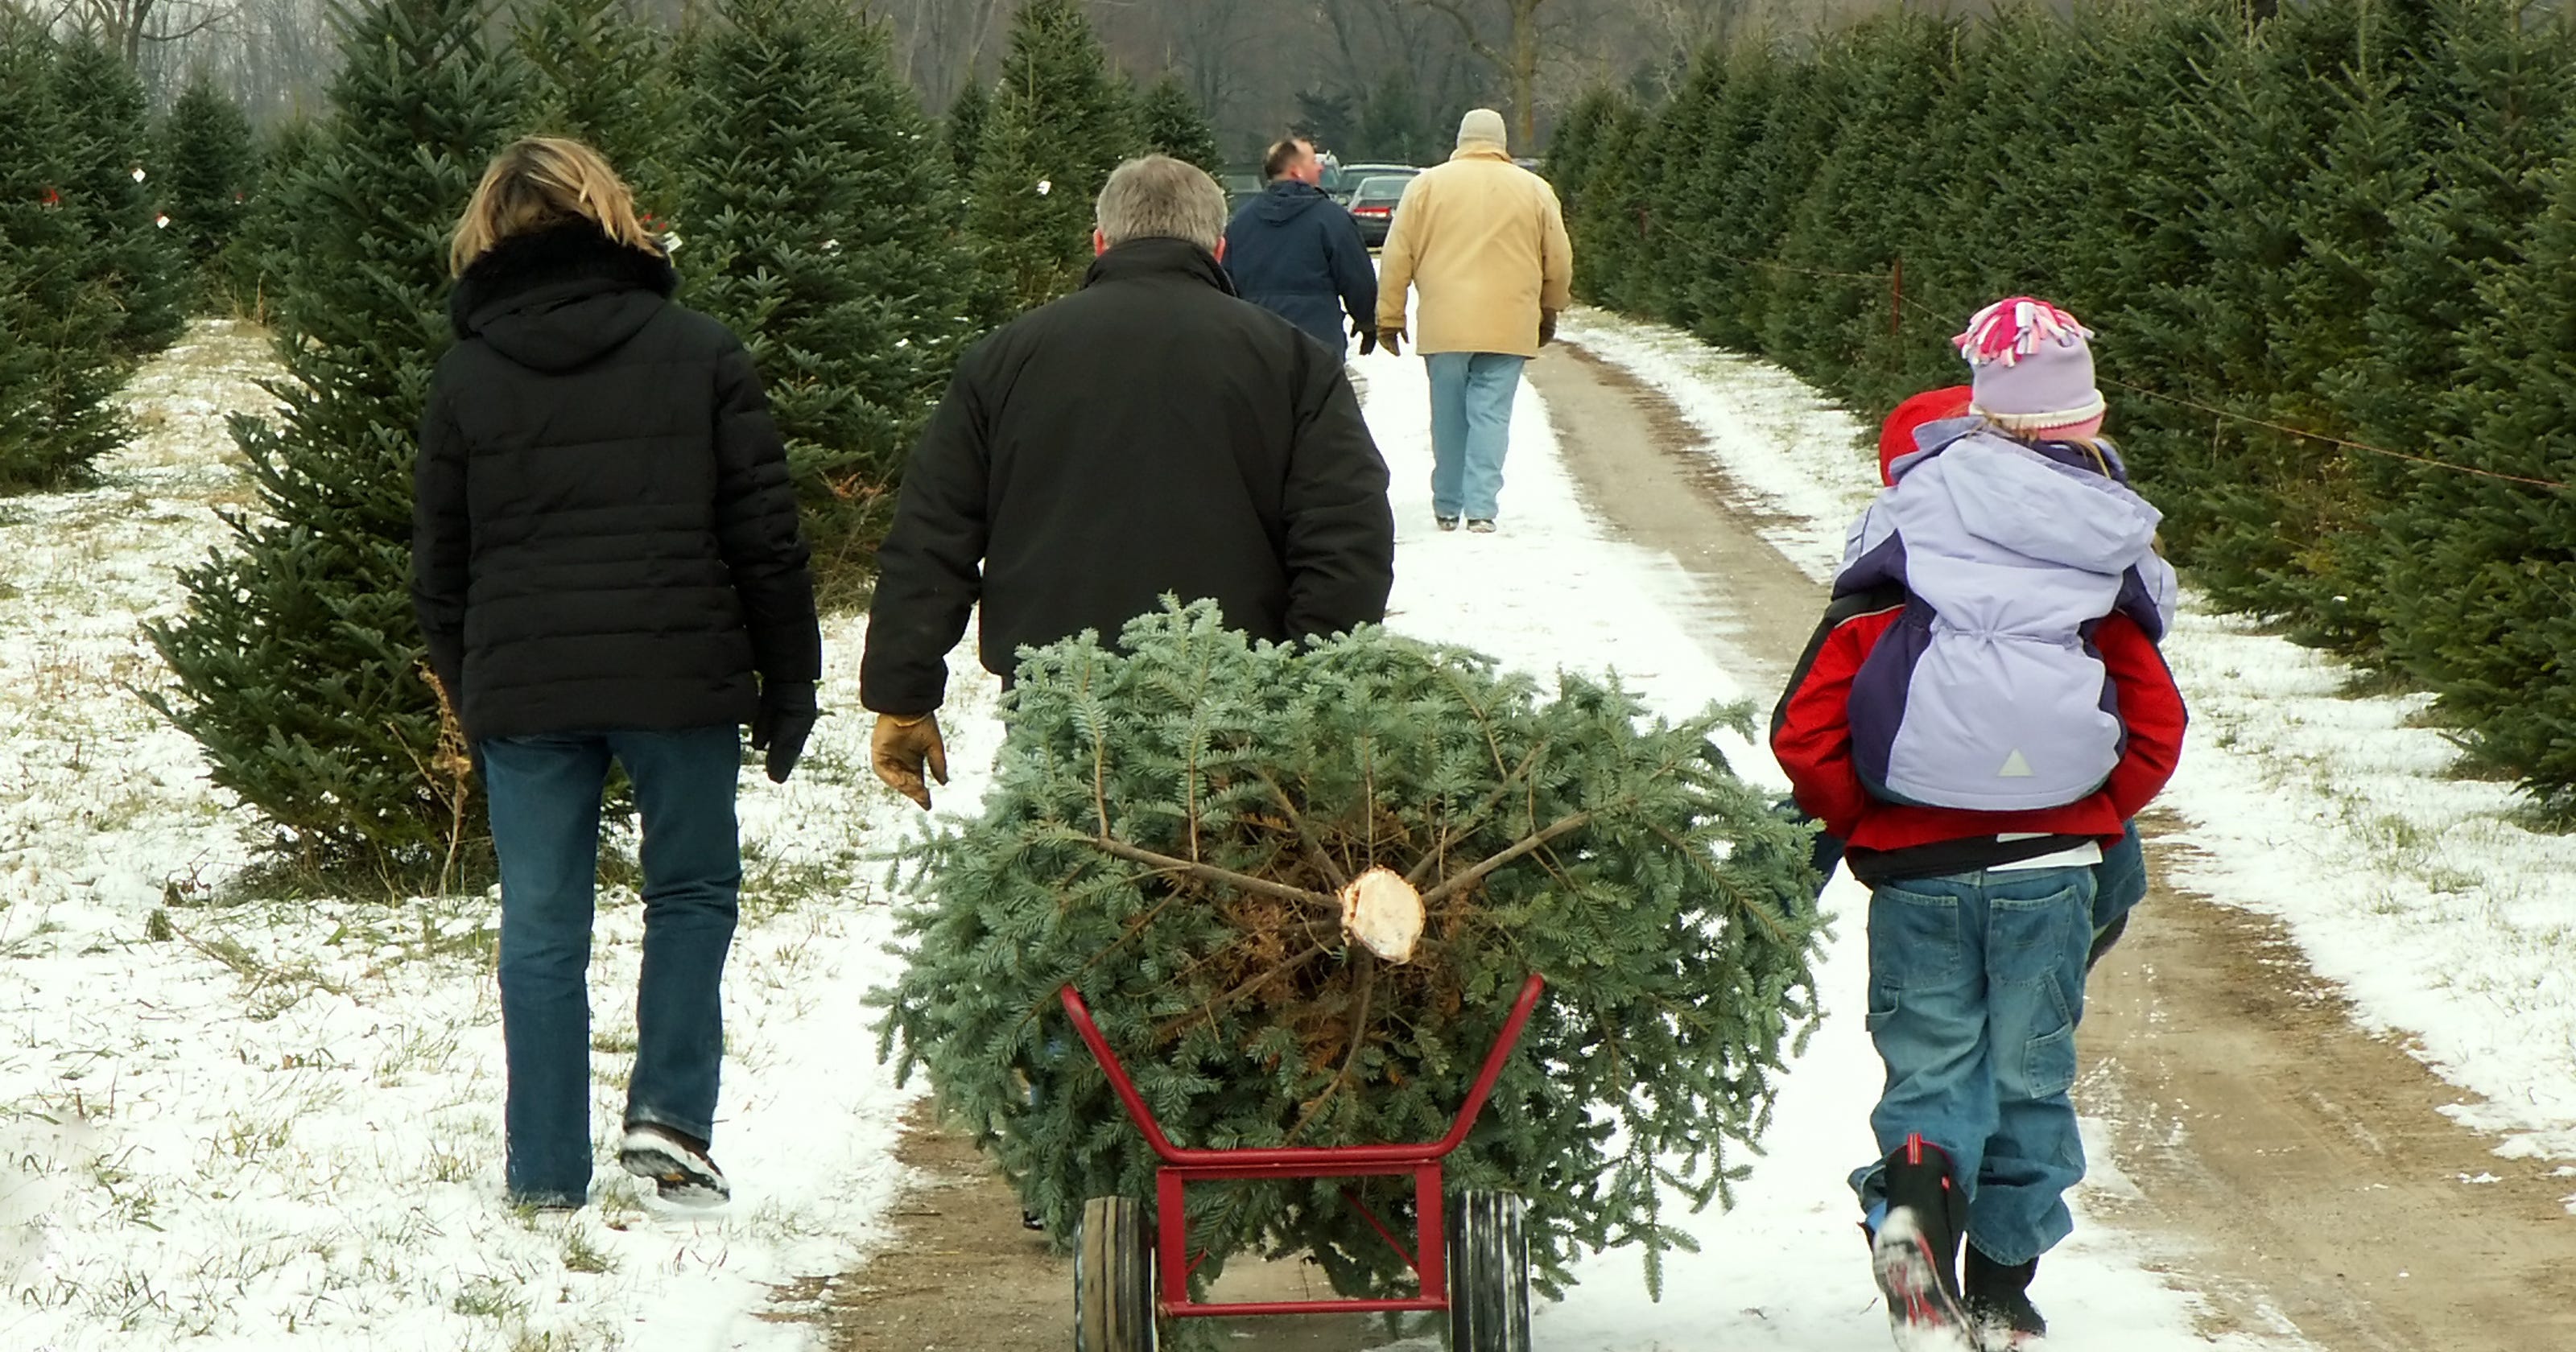 permits-on-sale-to-cut-down-your-own-christmas-tree